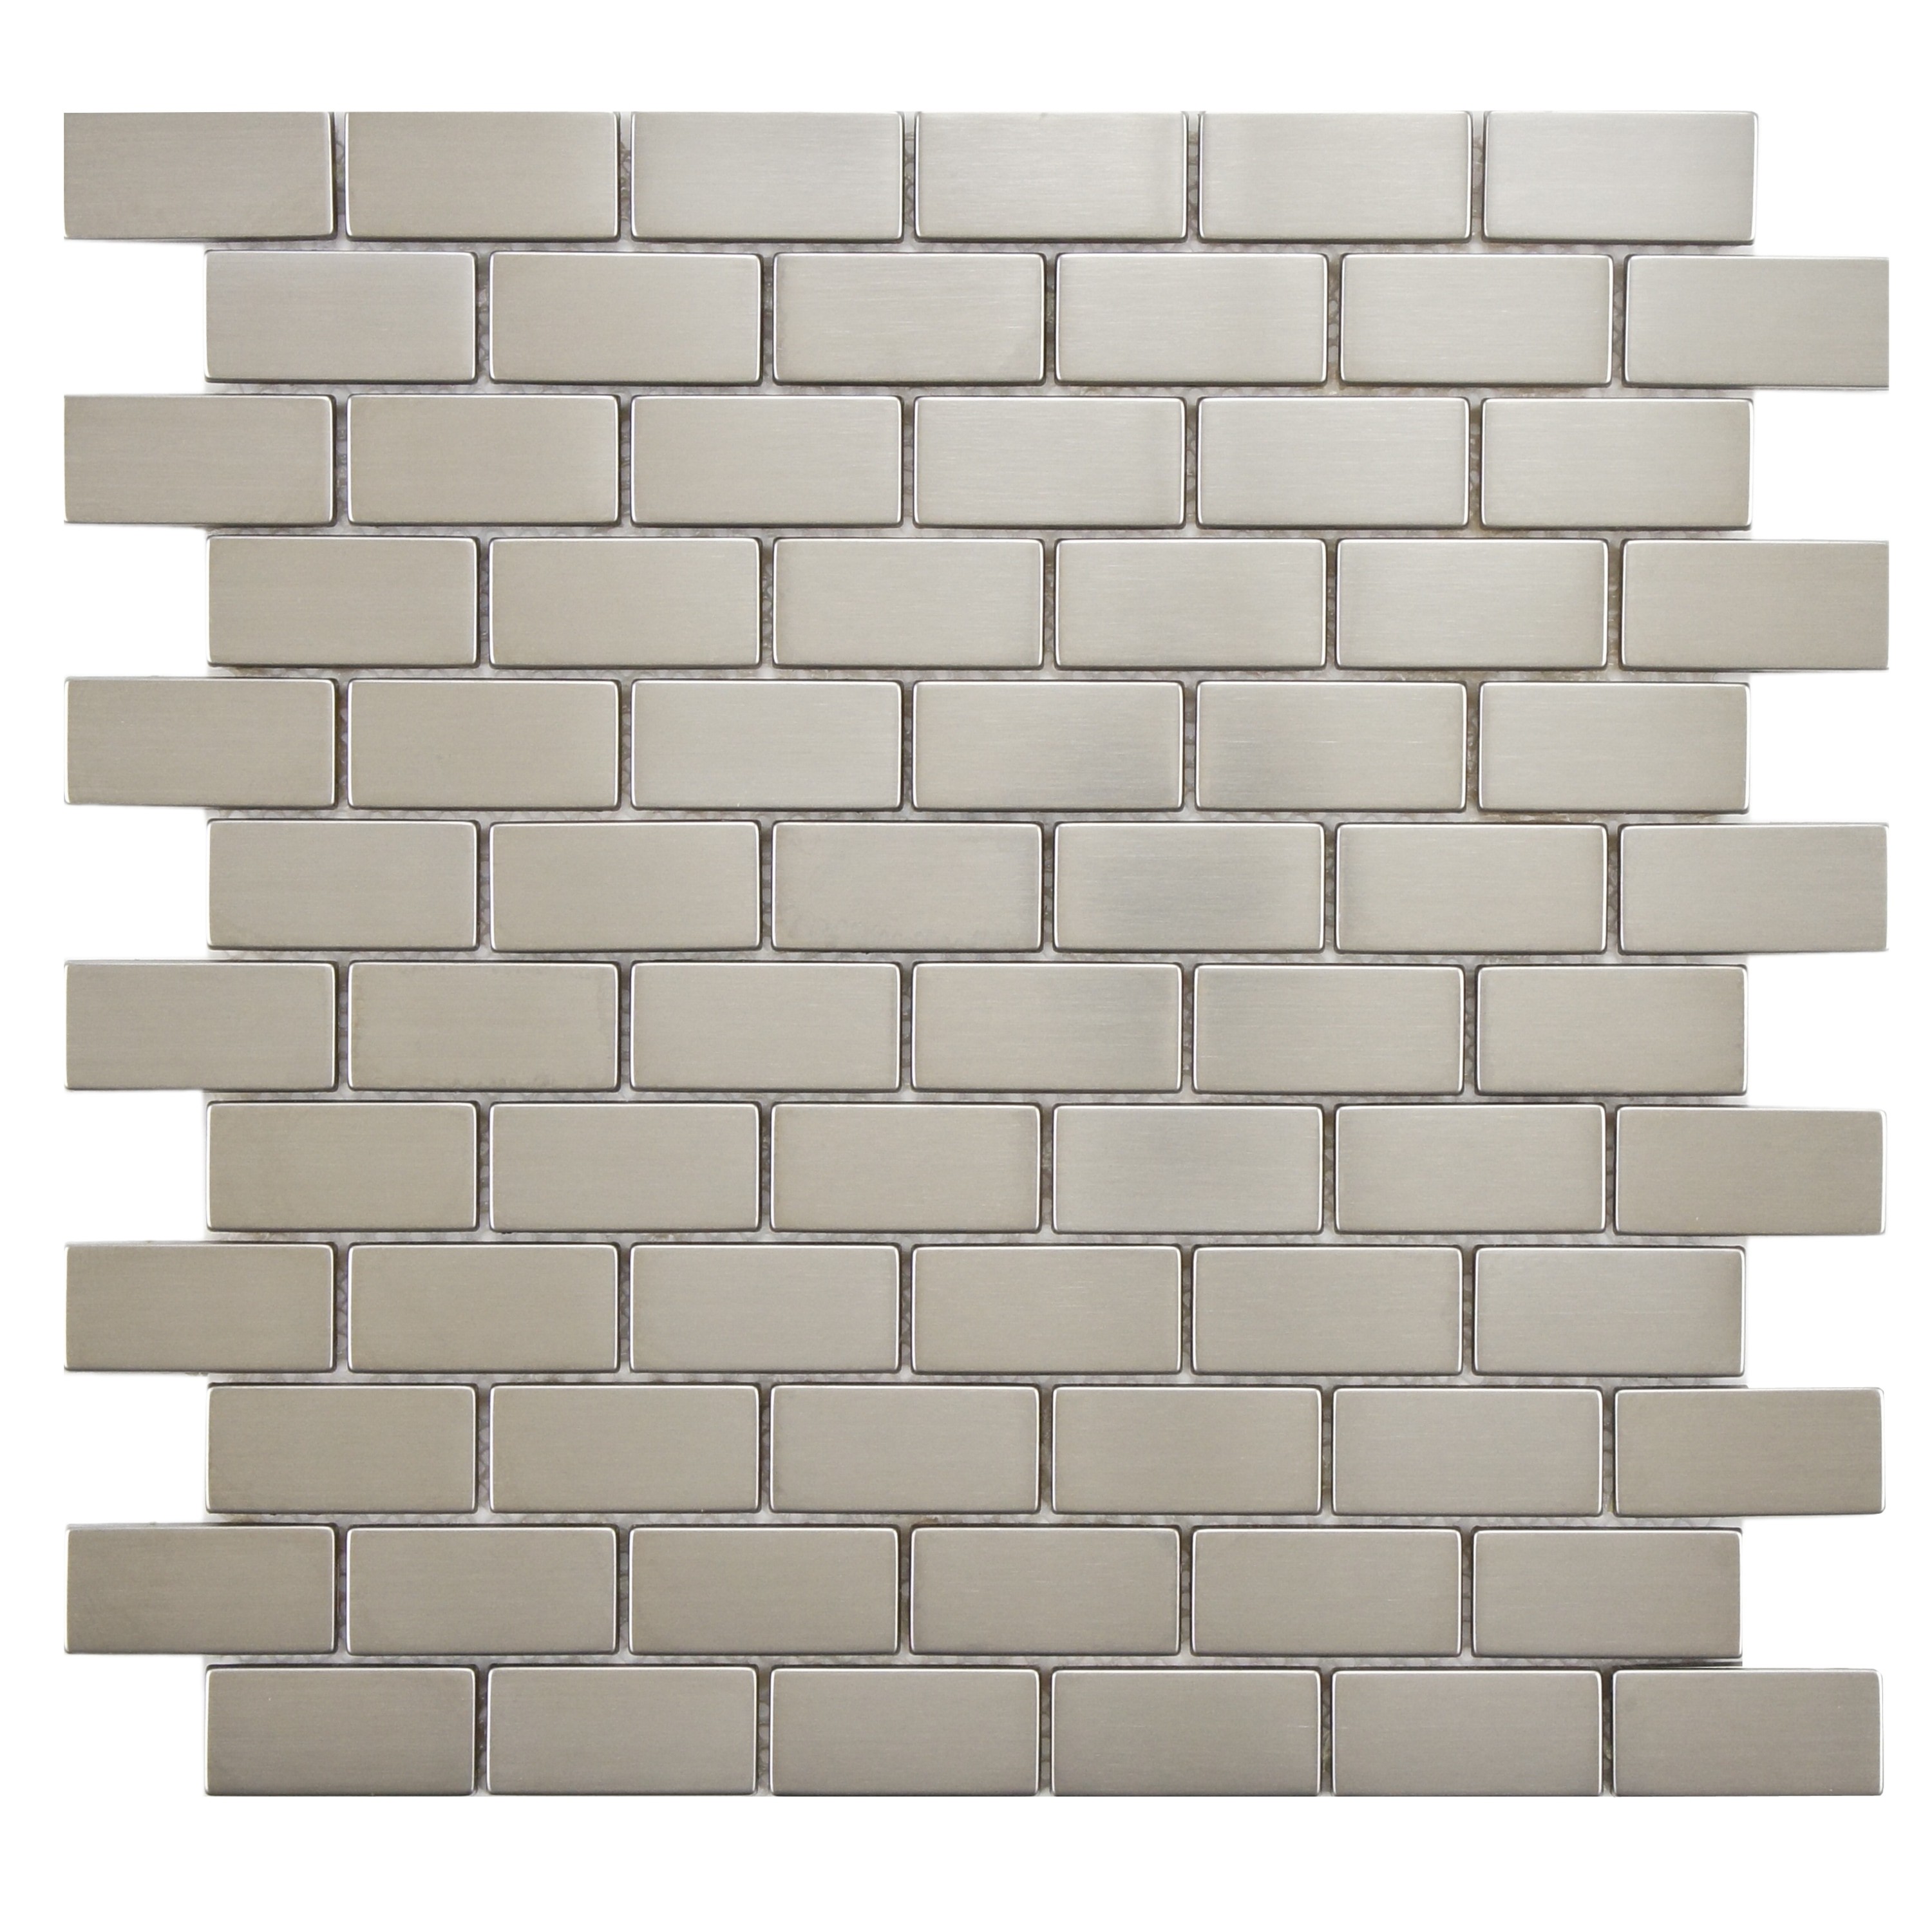 Porcelain Mosaic Wall Tile (Pack of 10) Today $160.99